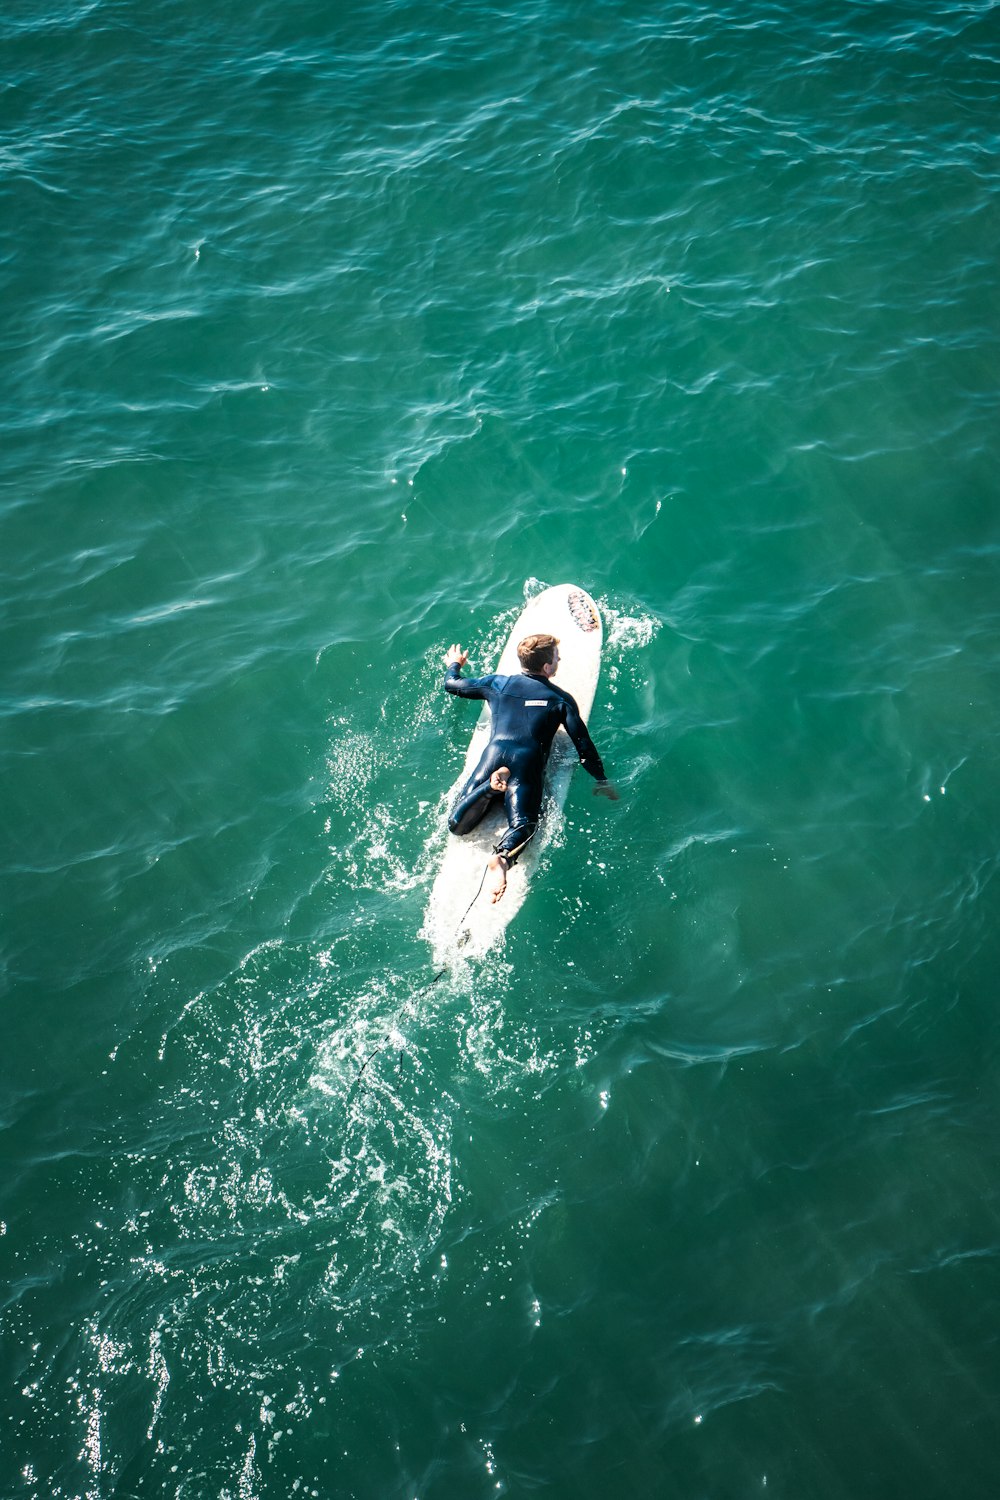 a man riding a surfboard on top of a body of water